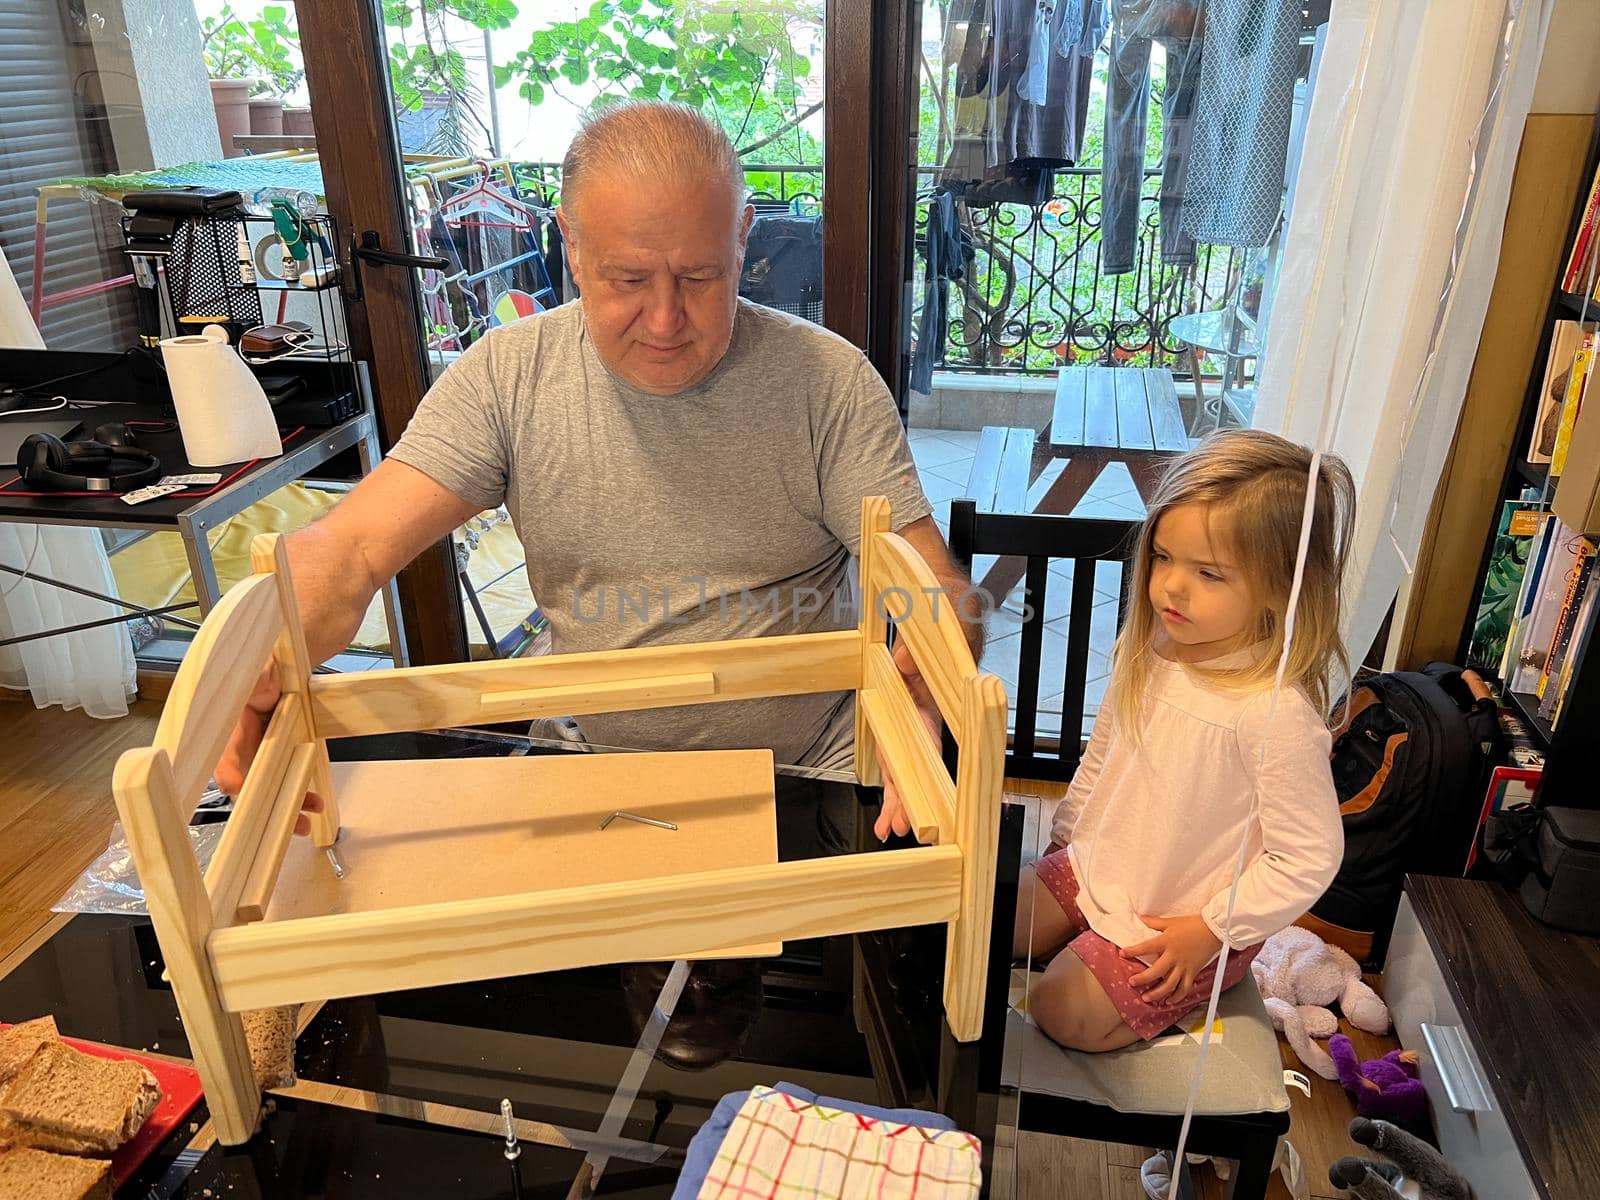 Grandpa assembled a toy wooden bed for a little girl. High quality photo